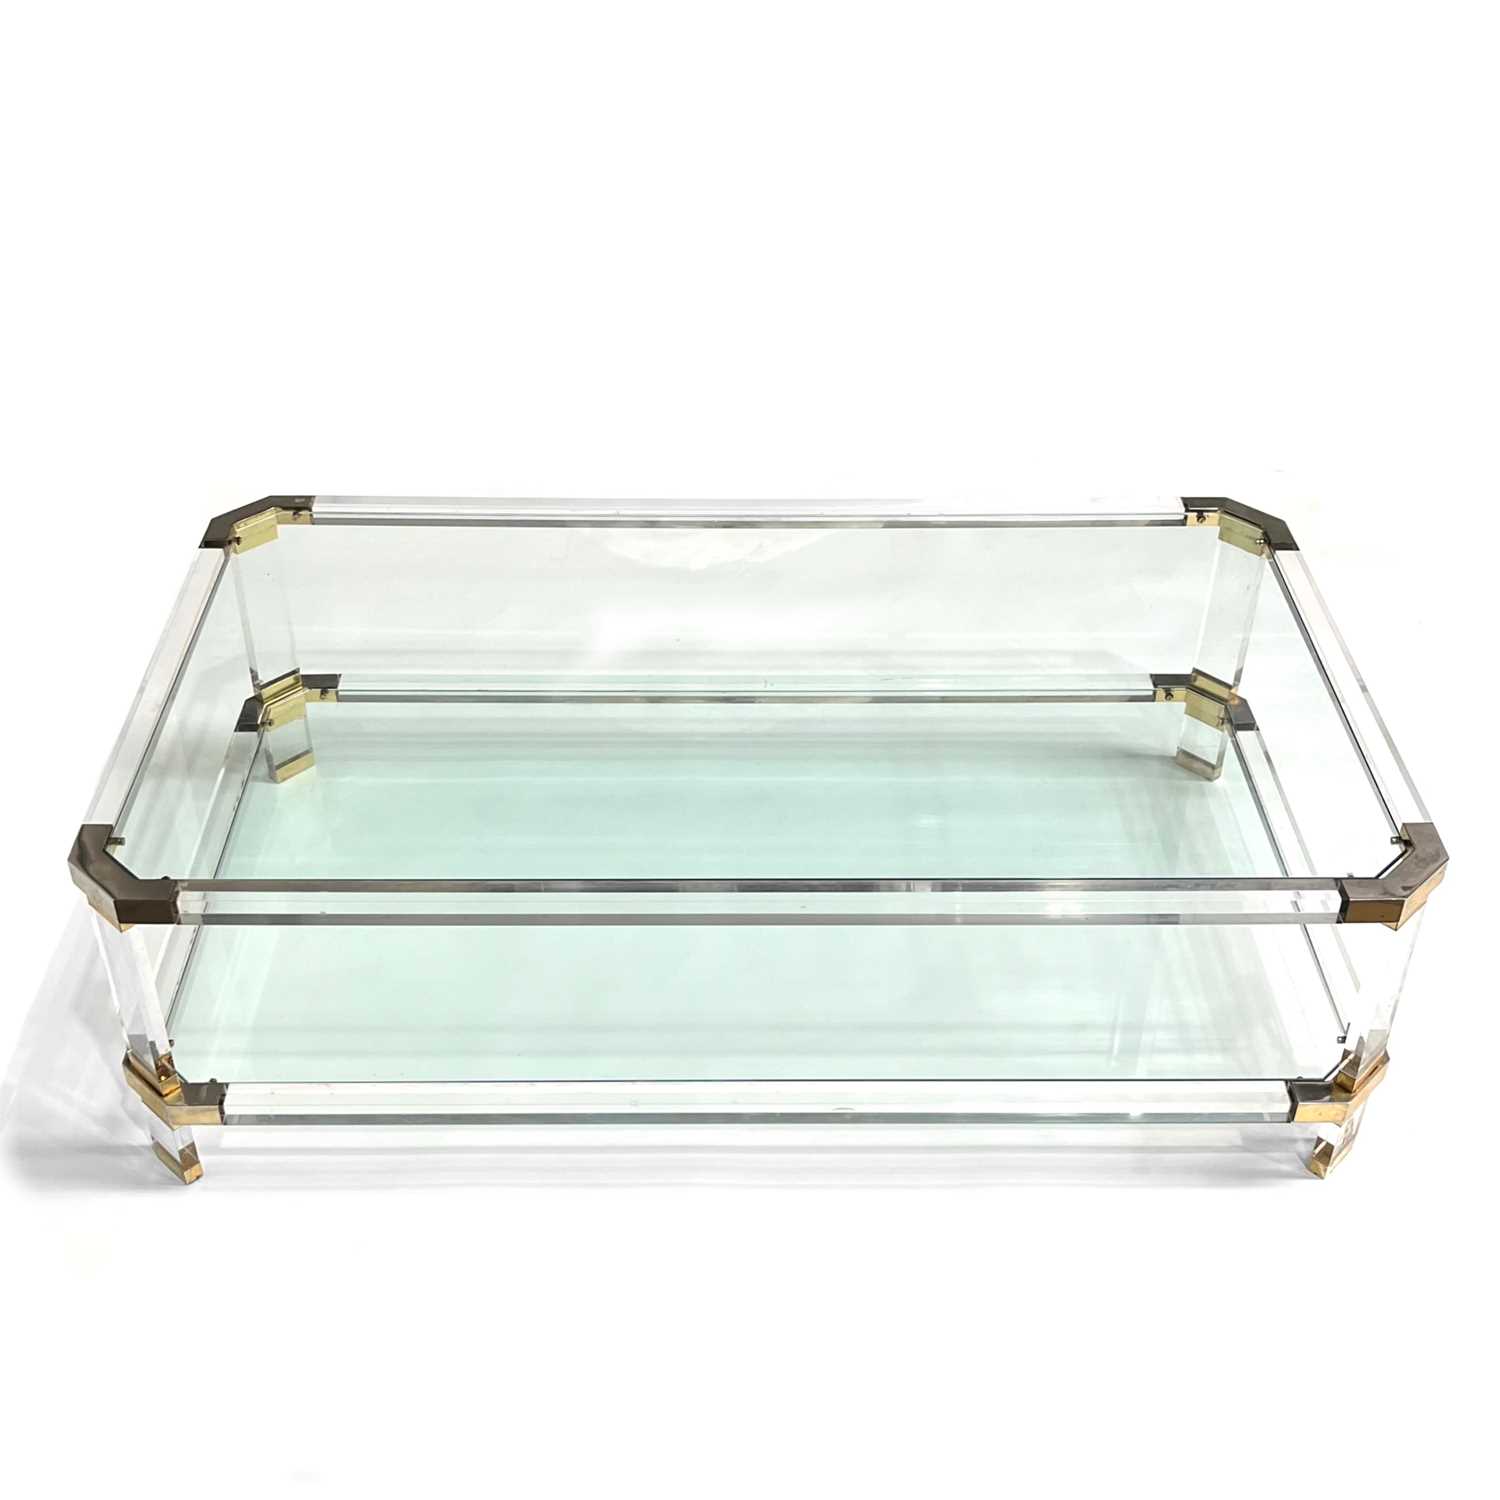 A Charles Hollis style lucite and glass coffee table, lucite frame, with drop-in glass top and - Image 2 of 2